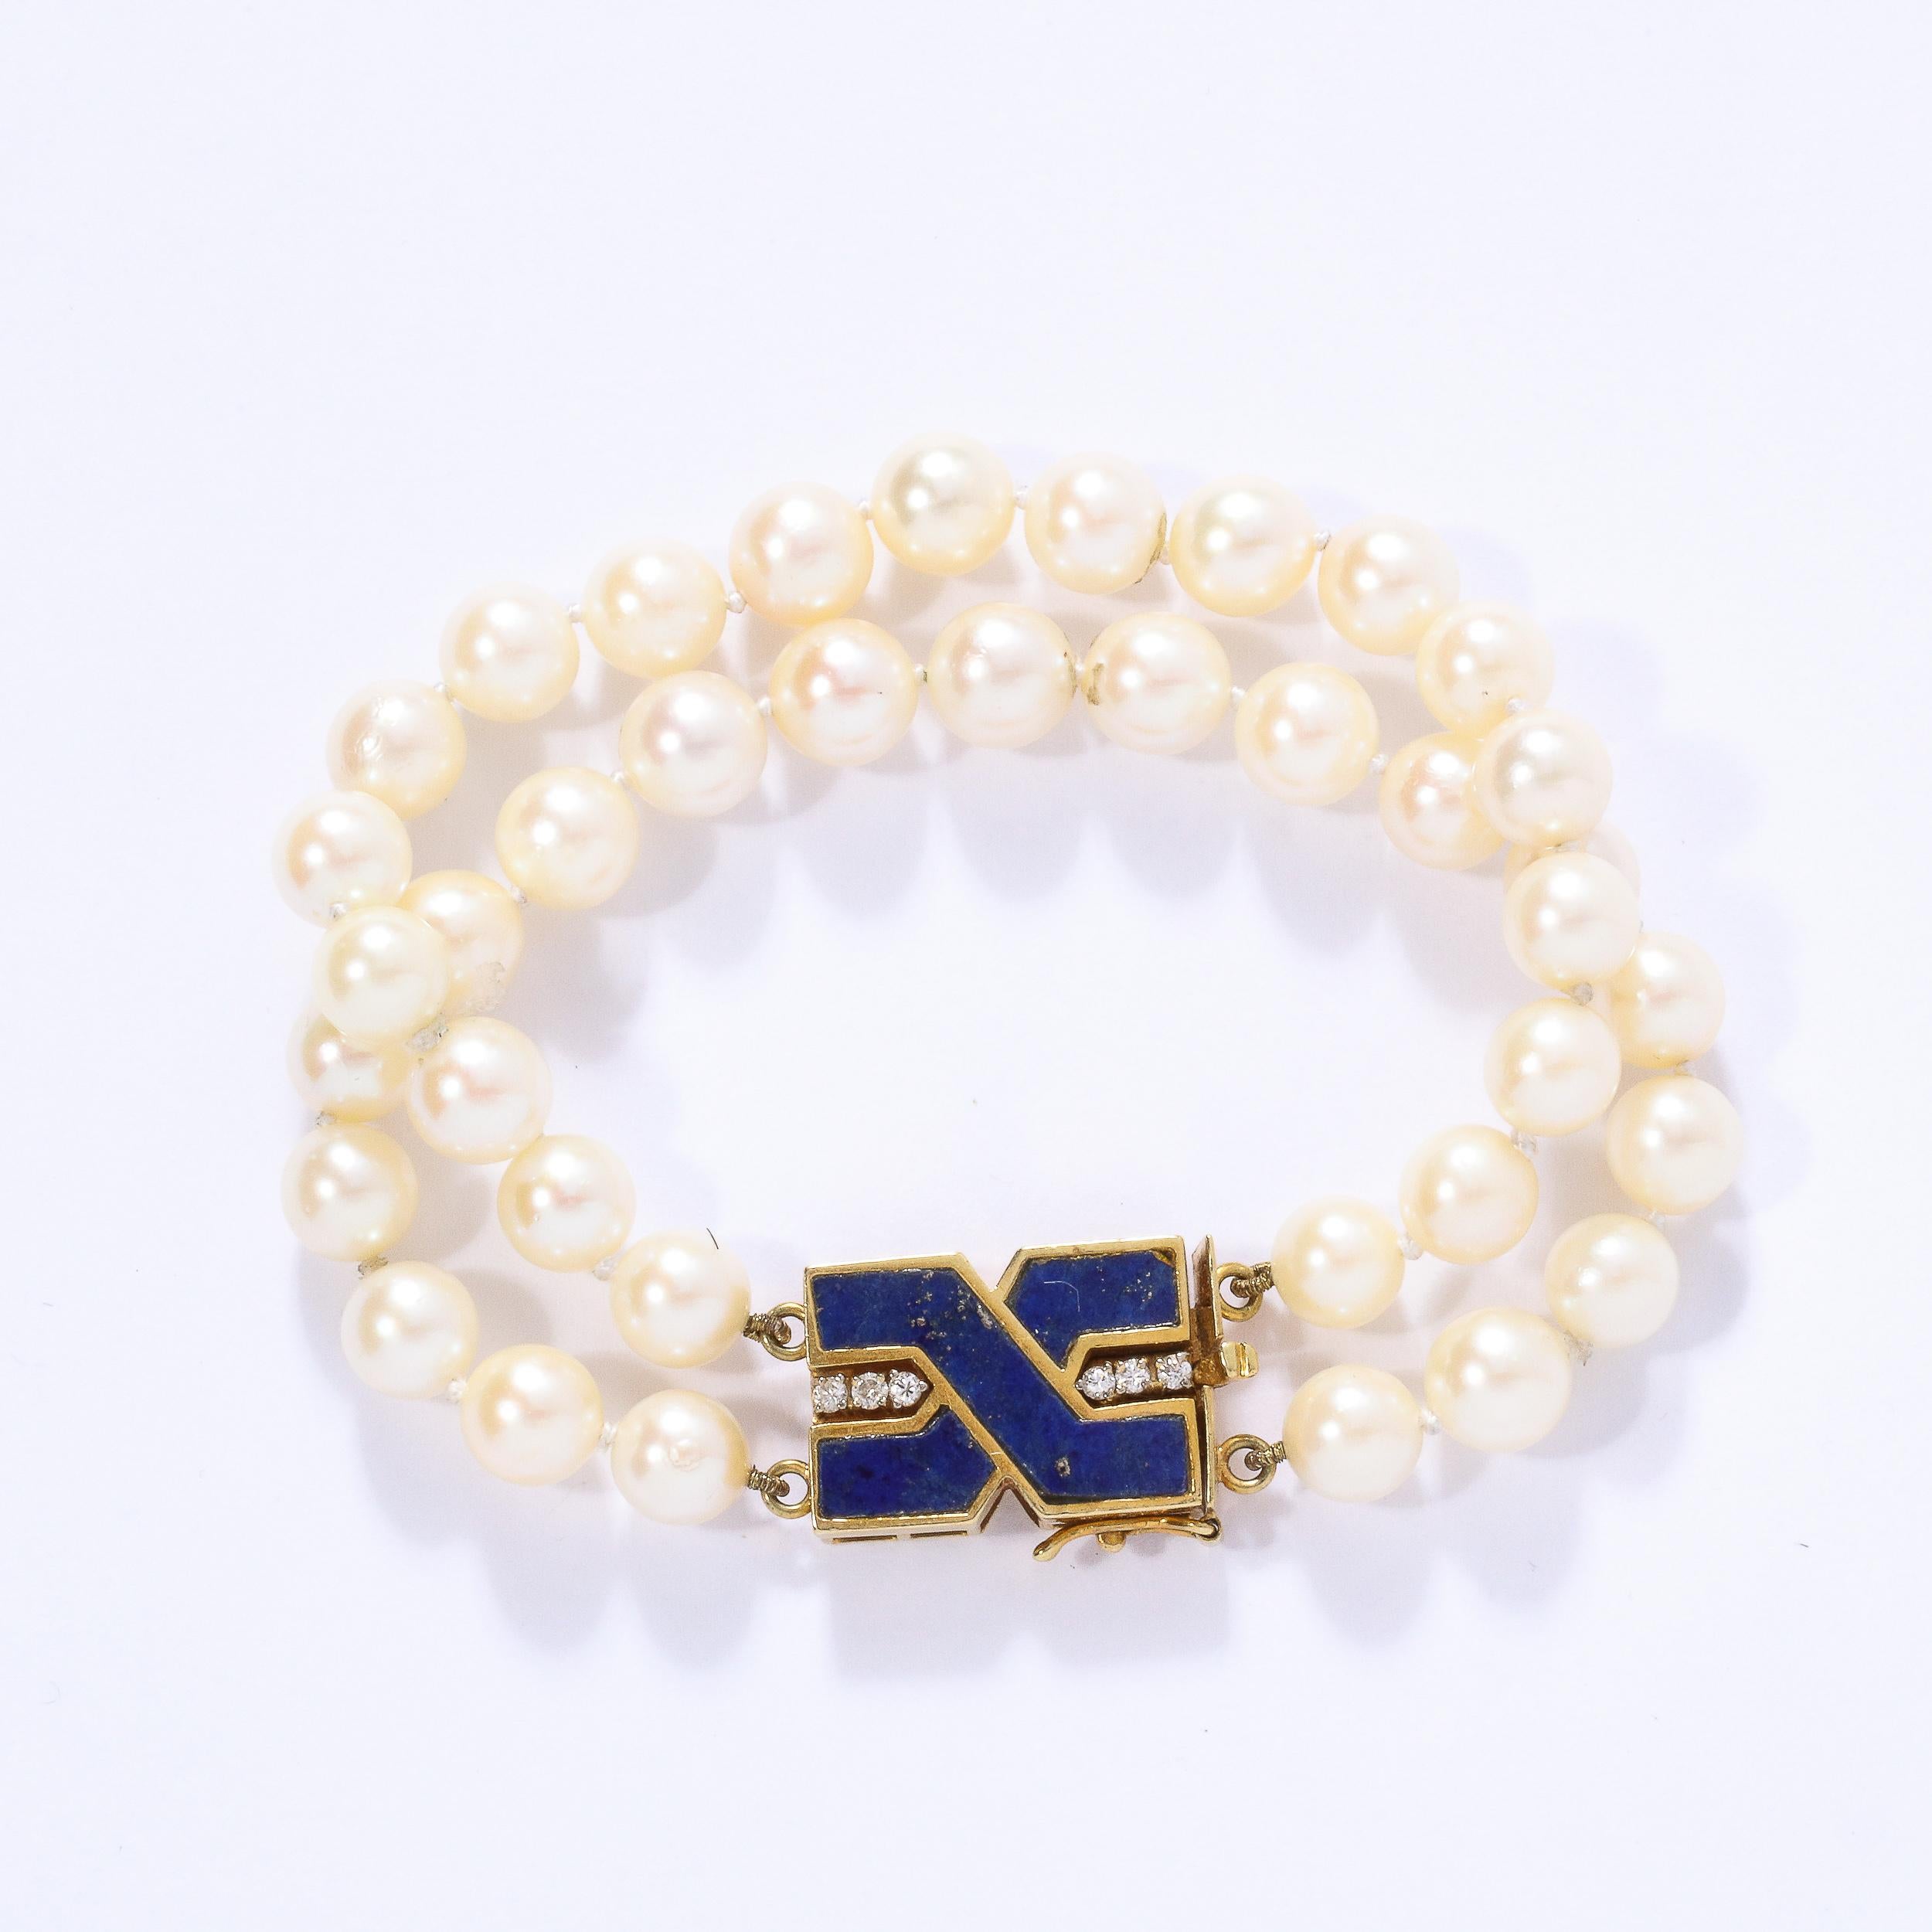 double strand pearl bracelet gold clasp